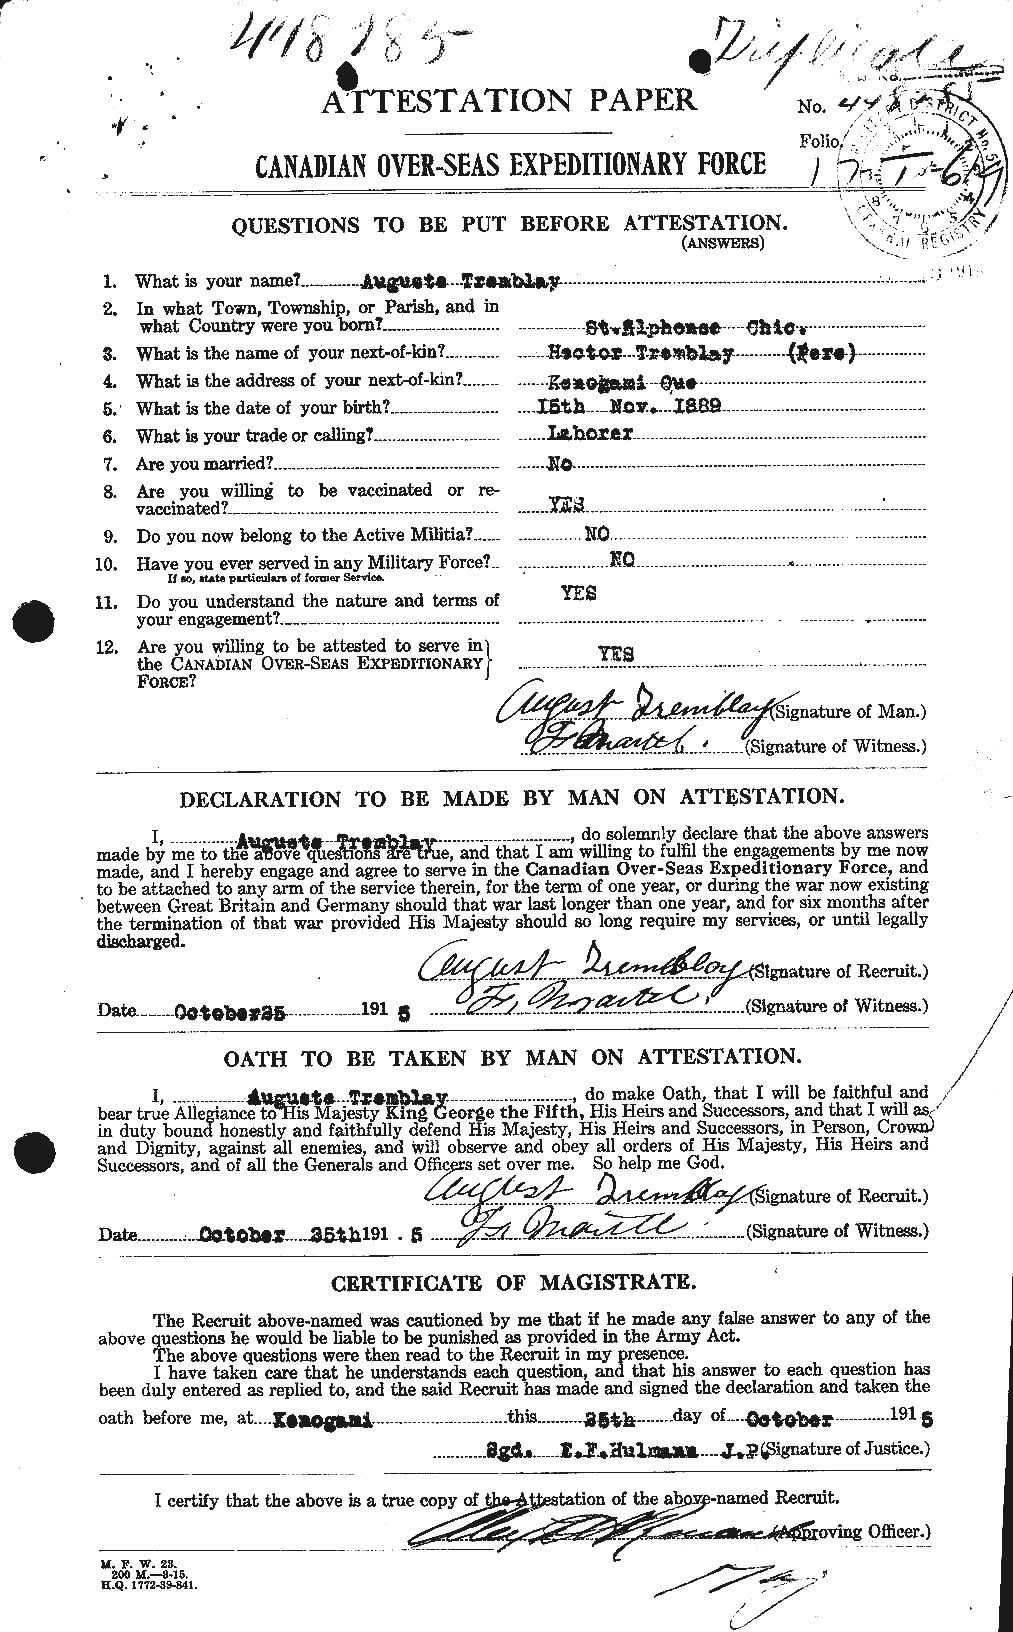 Personnel Records of the First World War - CEF 638975a